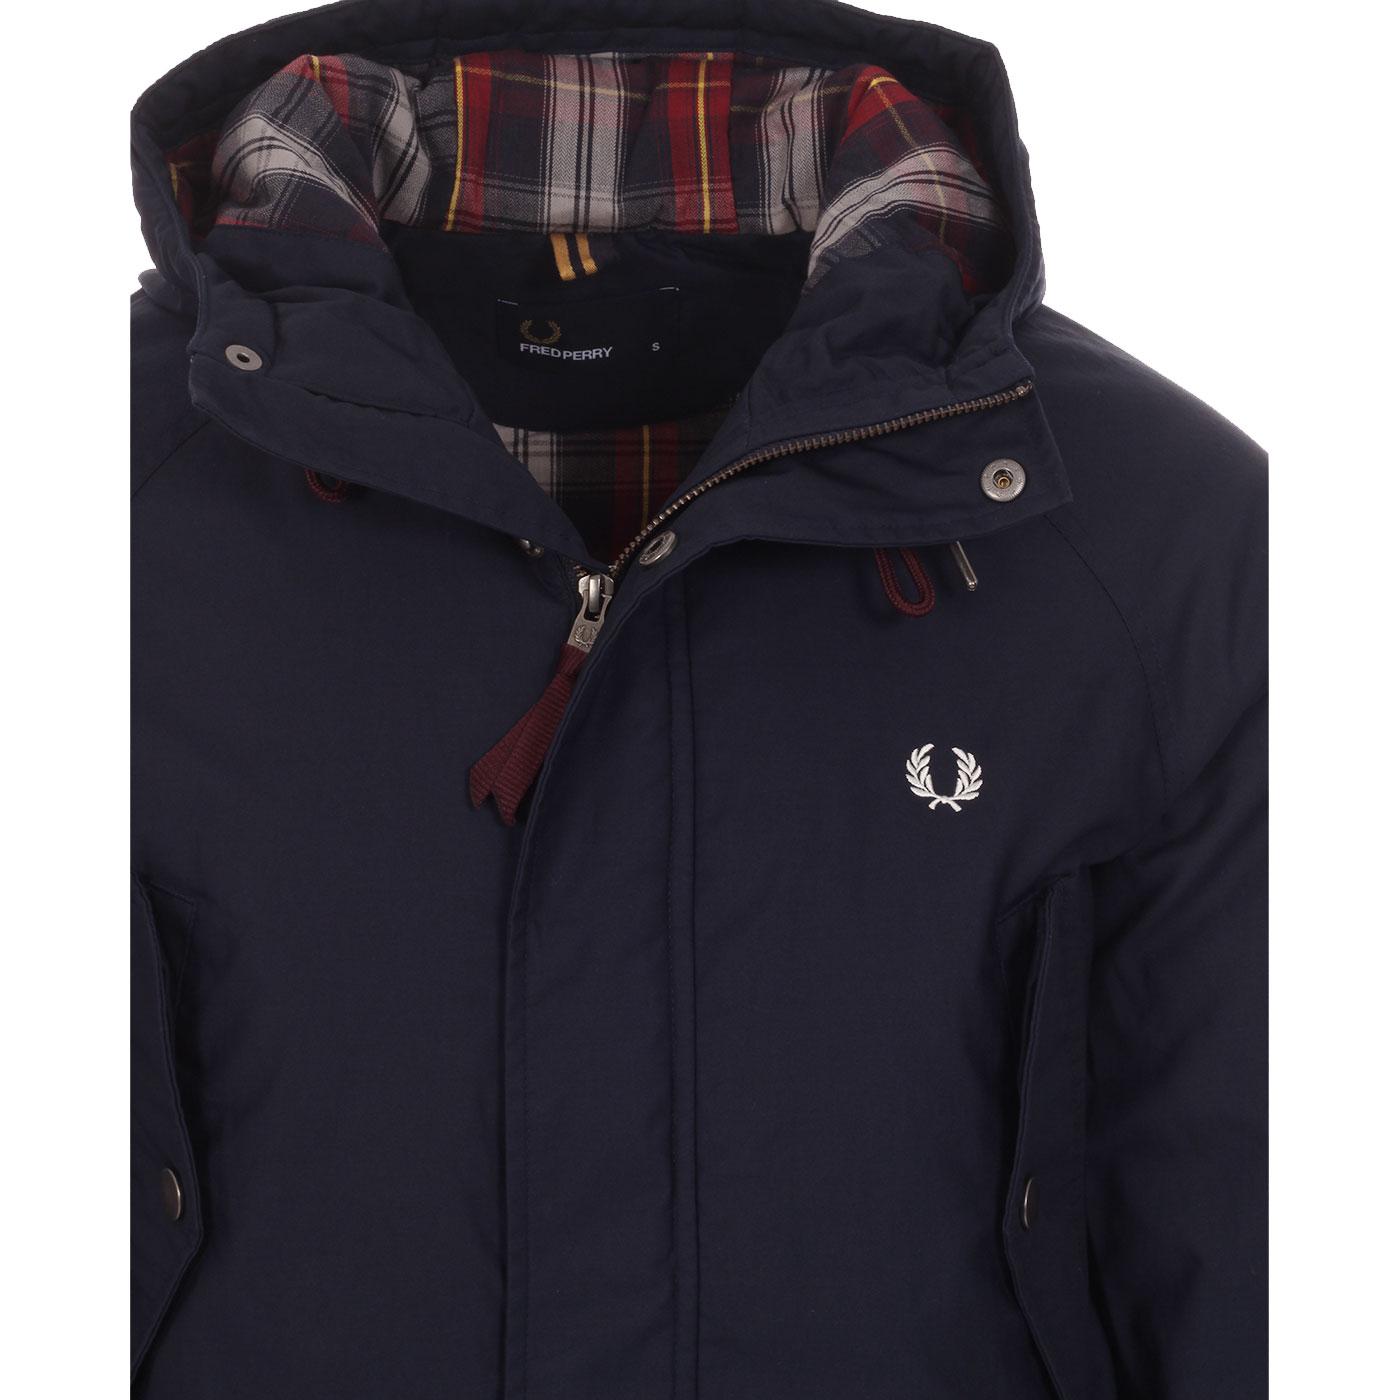 Portwood FRED PERRY Padded Mod Parka Jacket DC